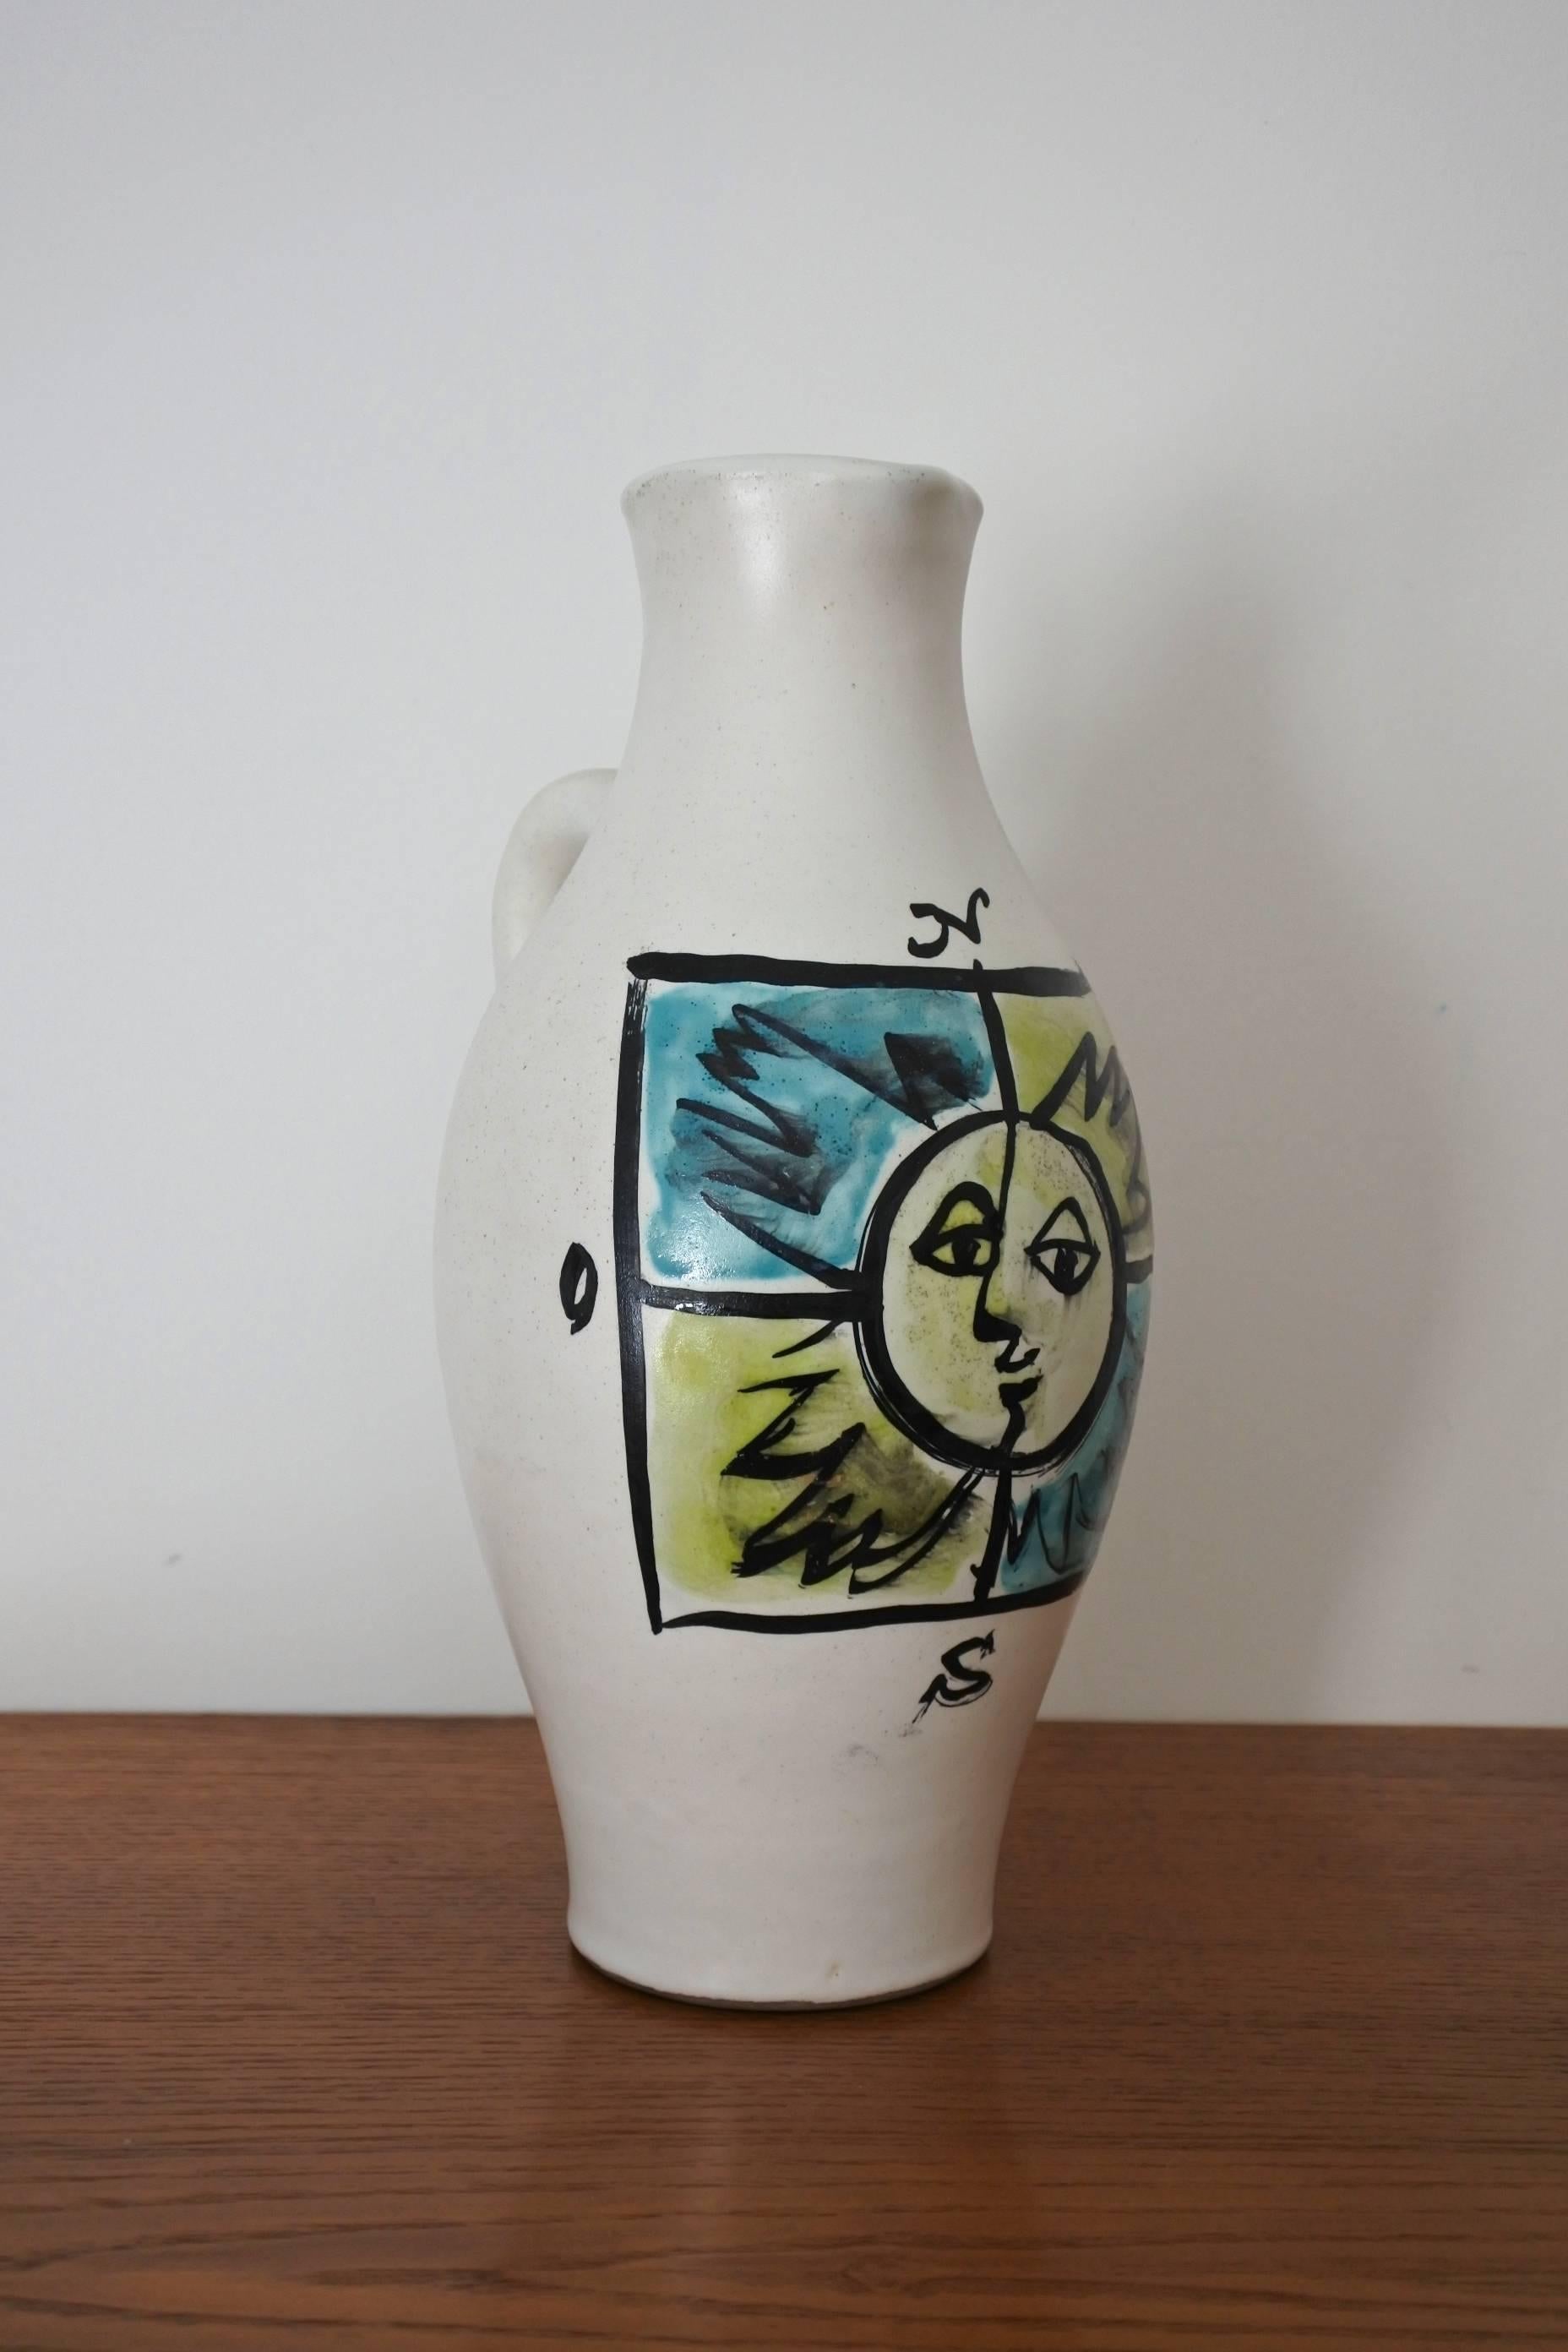 Pitcher vase by renowned french pottery artist Georges Jouve.
Glazed earthenware. Hand painted decor on the vase showing the 4 cardinal points with a sun in the middle.
Signed with the artist's cypher. 
Circa 1955
Decor documented in the book